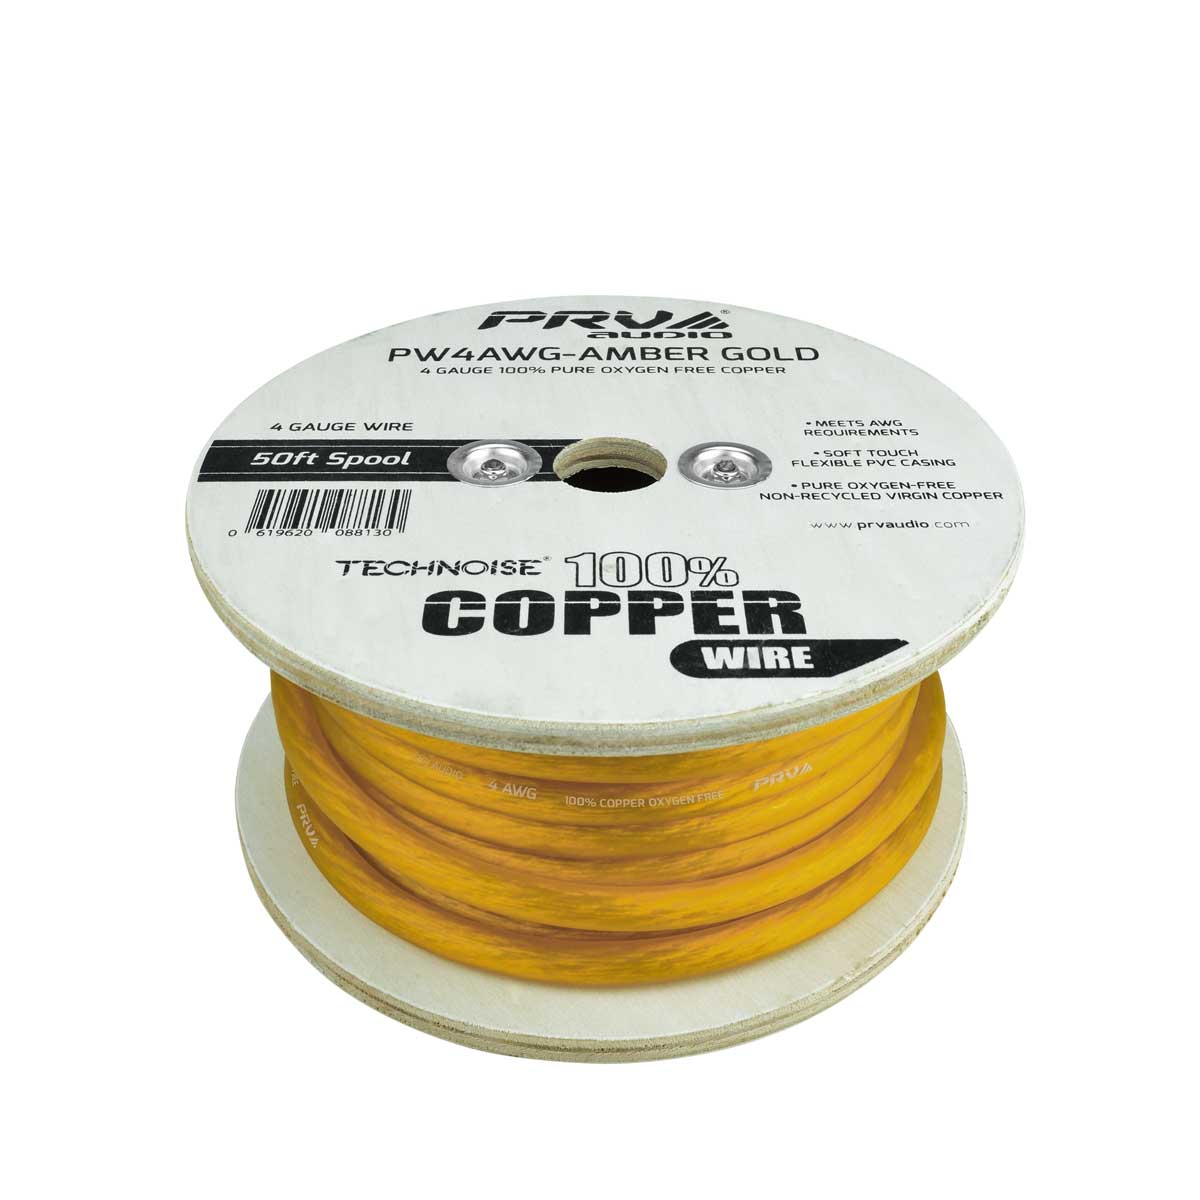 PRV AUDIO WIRE 50FT ROLL AMBER GOLD